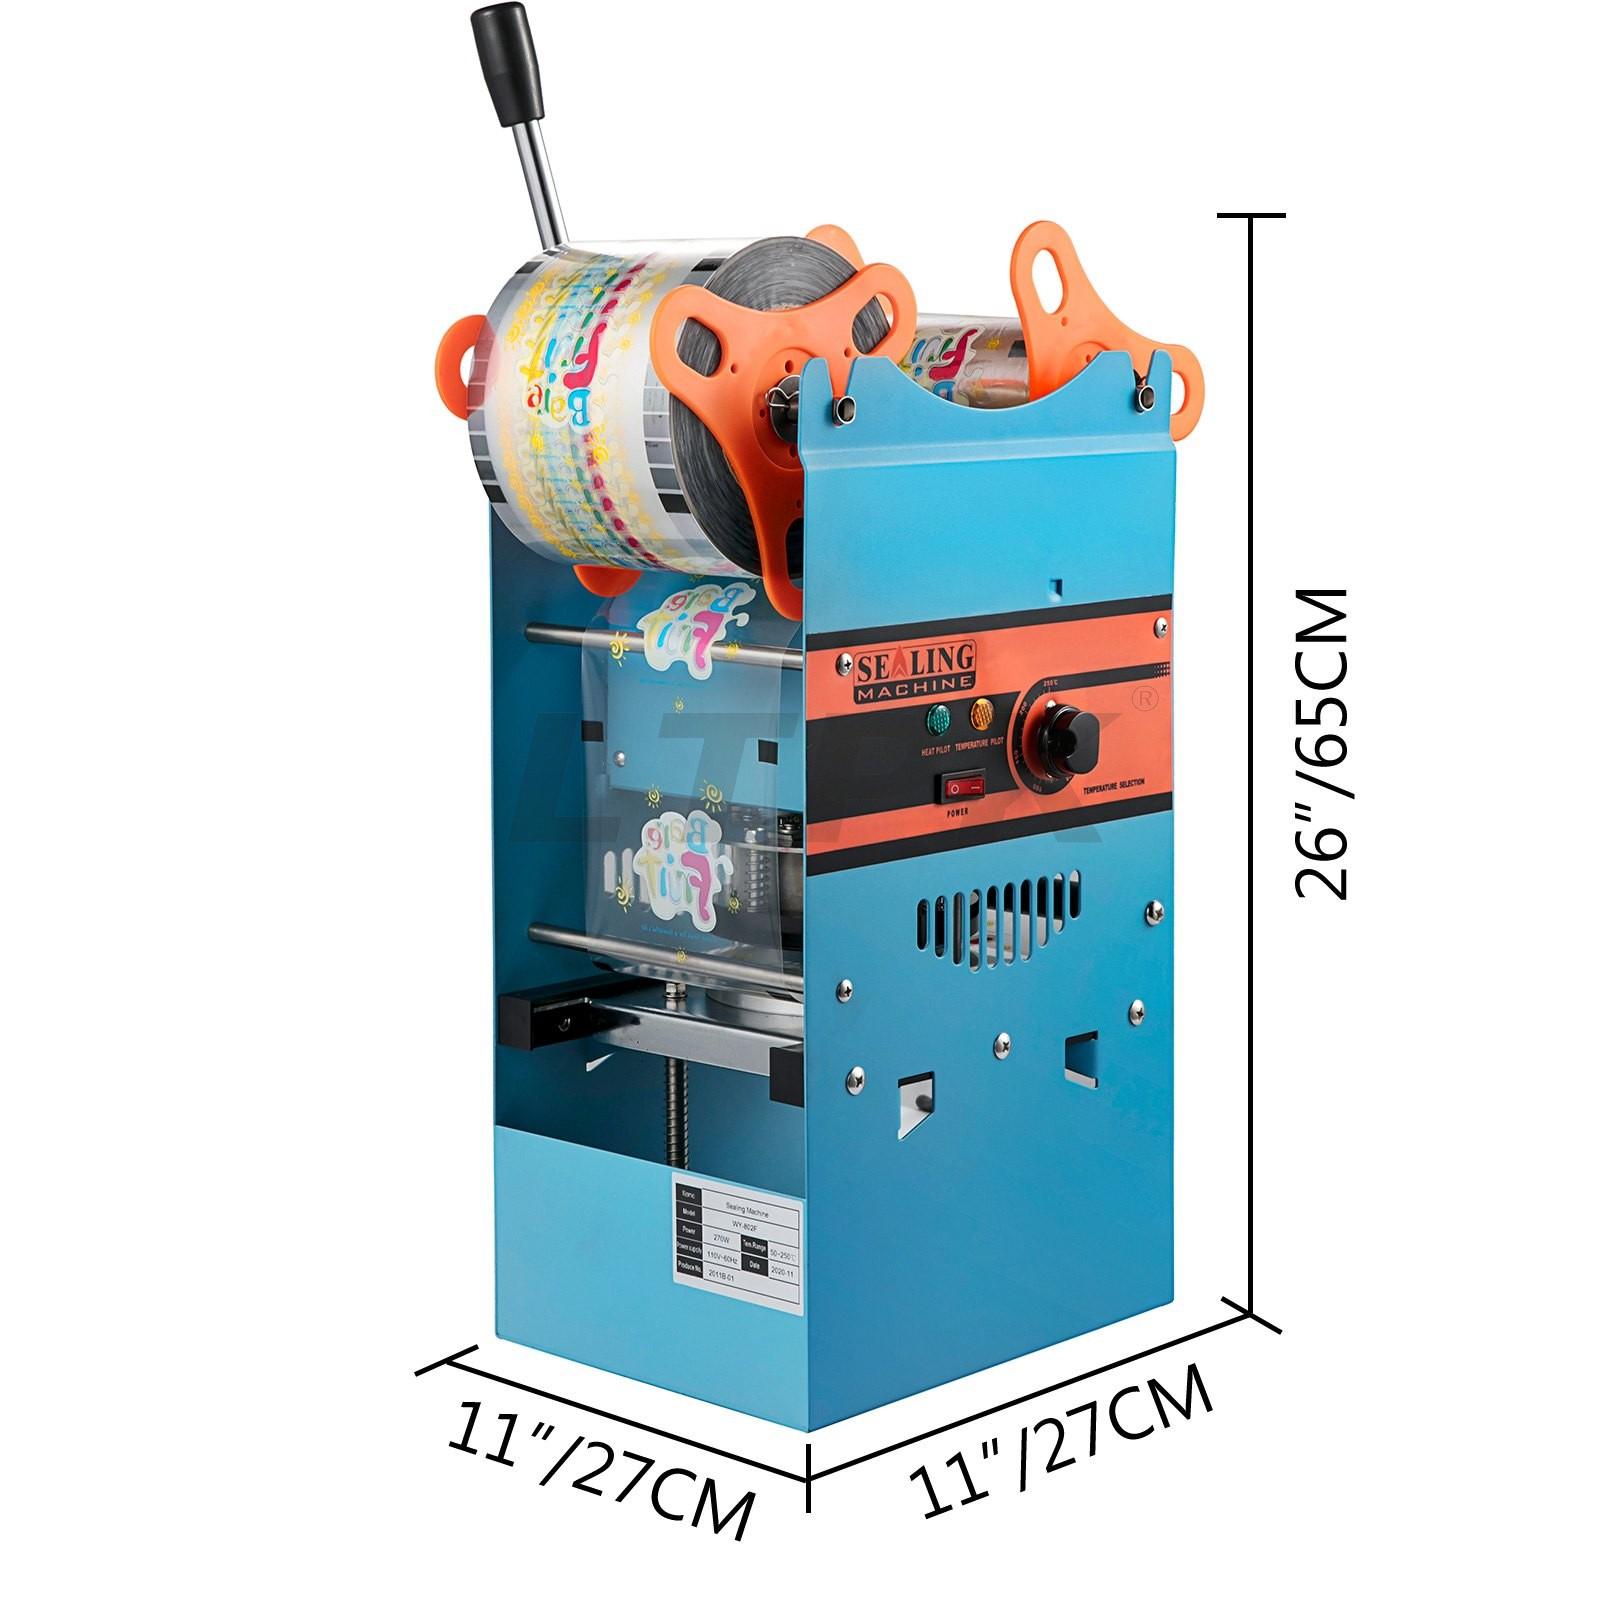 LTPK 90/95mm Cup Diameter Cup Sealing Machine with Heating